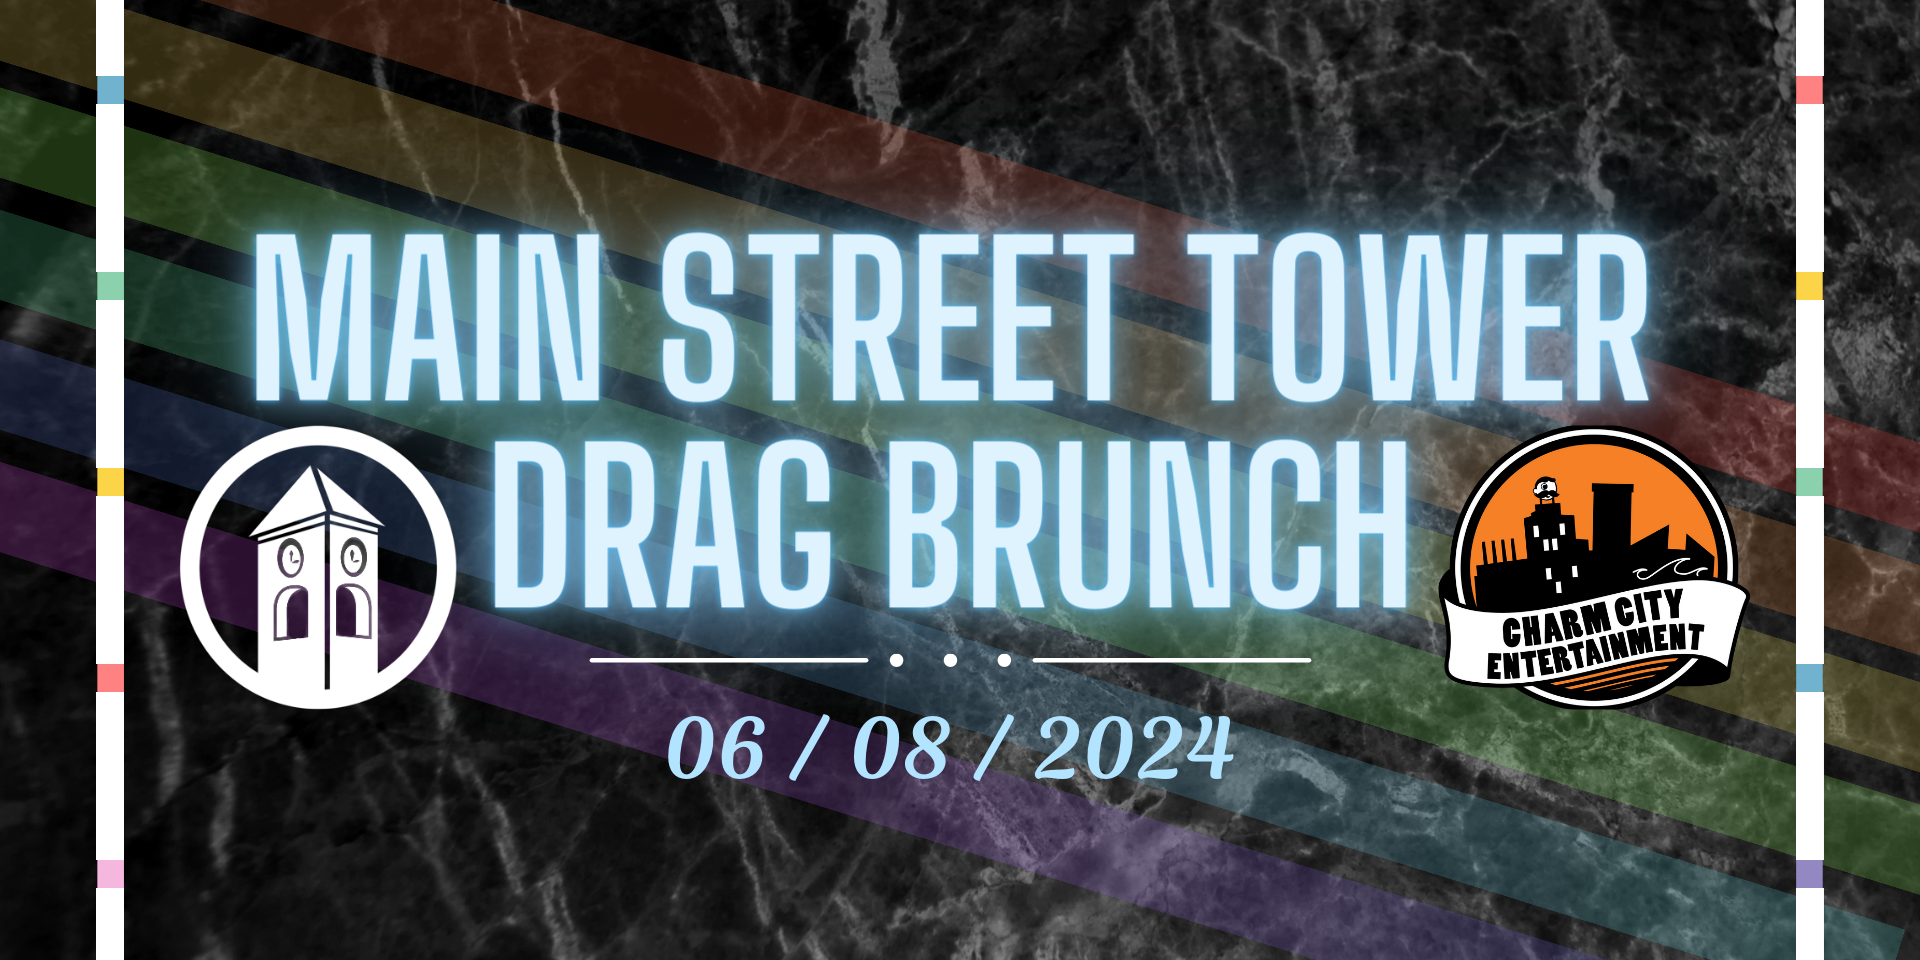 a black background with a marble texture, , the Charm City Entertainment logo, the Main Street Tower logo, and blue text. The text reads: Main Street Tower Drag Brunch. 06/08/2024